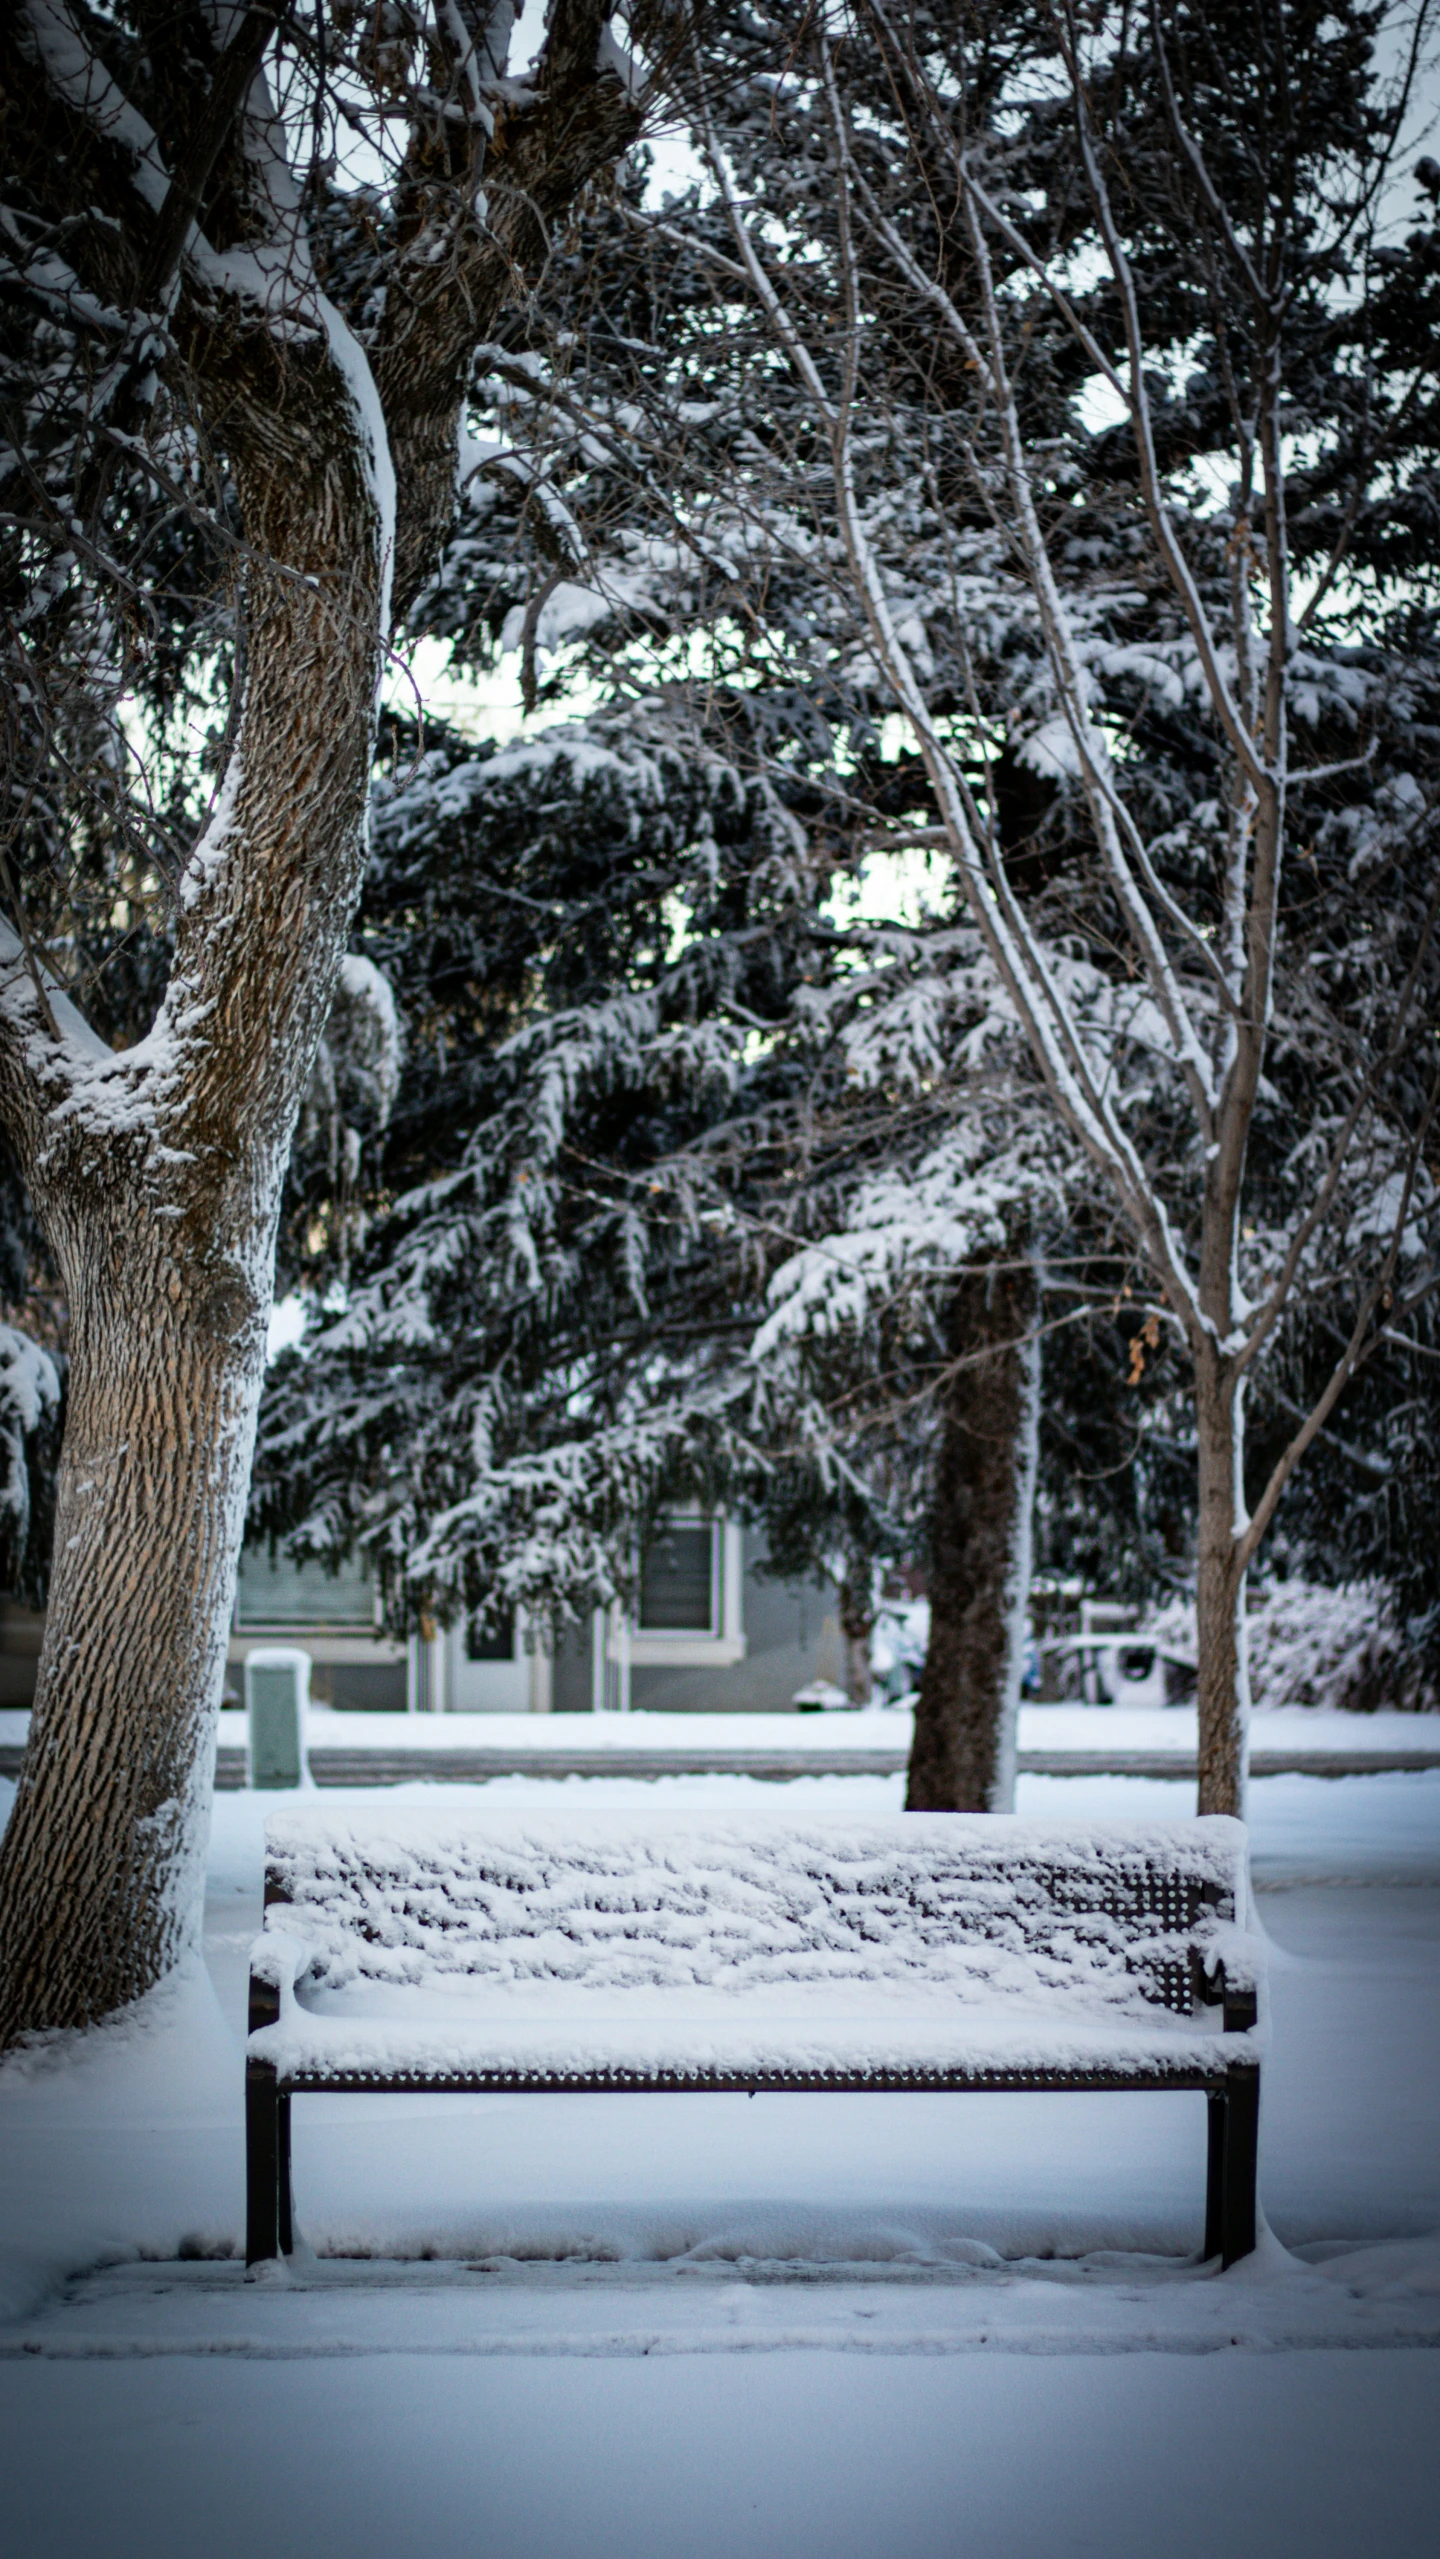 snow covered park bench and trees on a snowy day